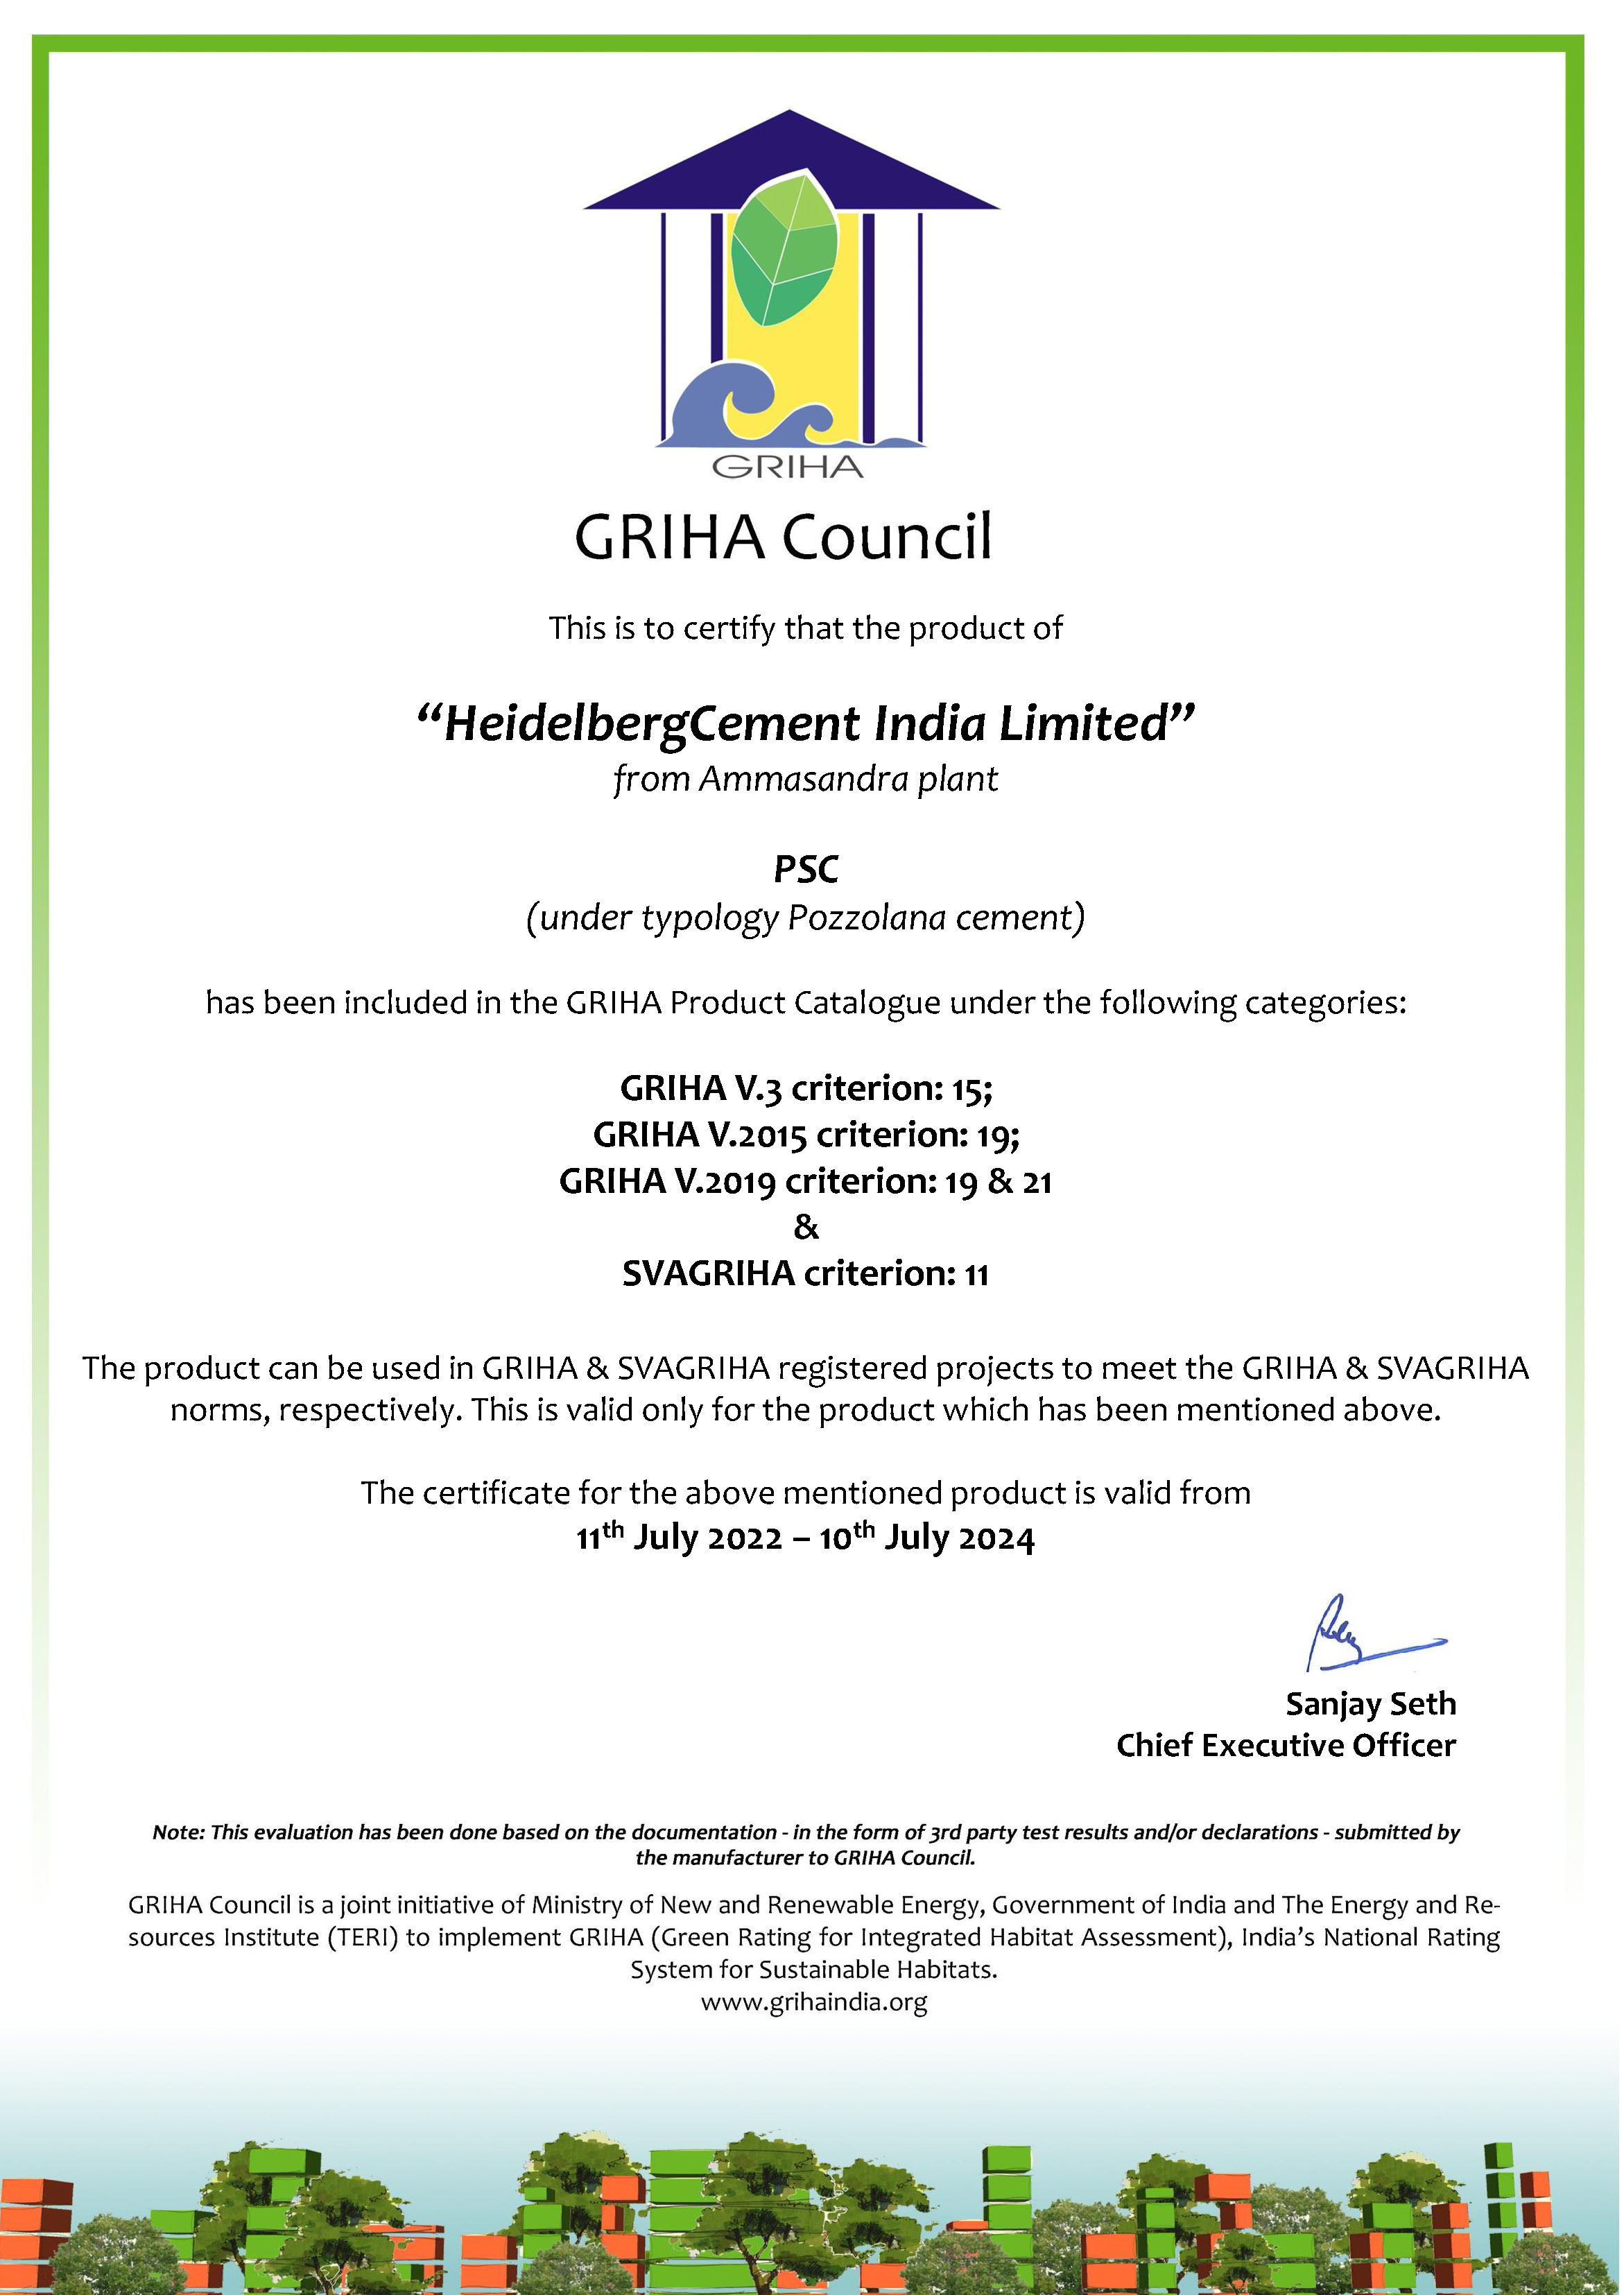 GRIHA Council certified HeidelbergCement PSC as Green Building Product